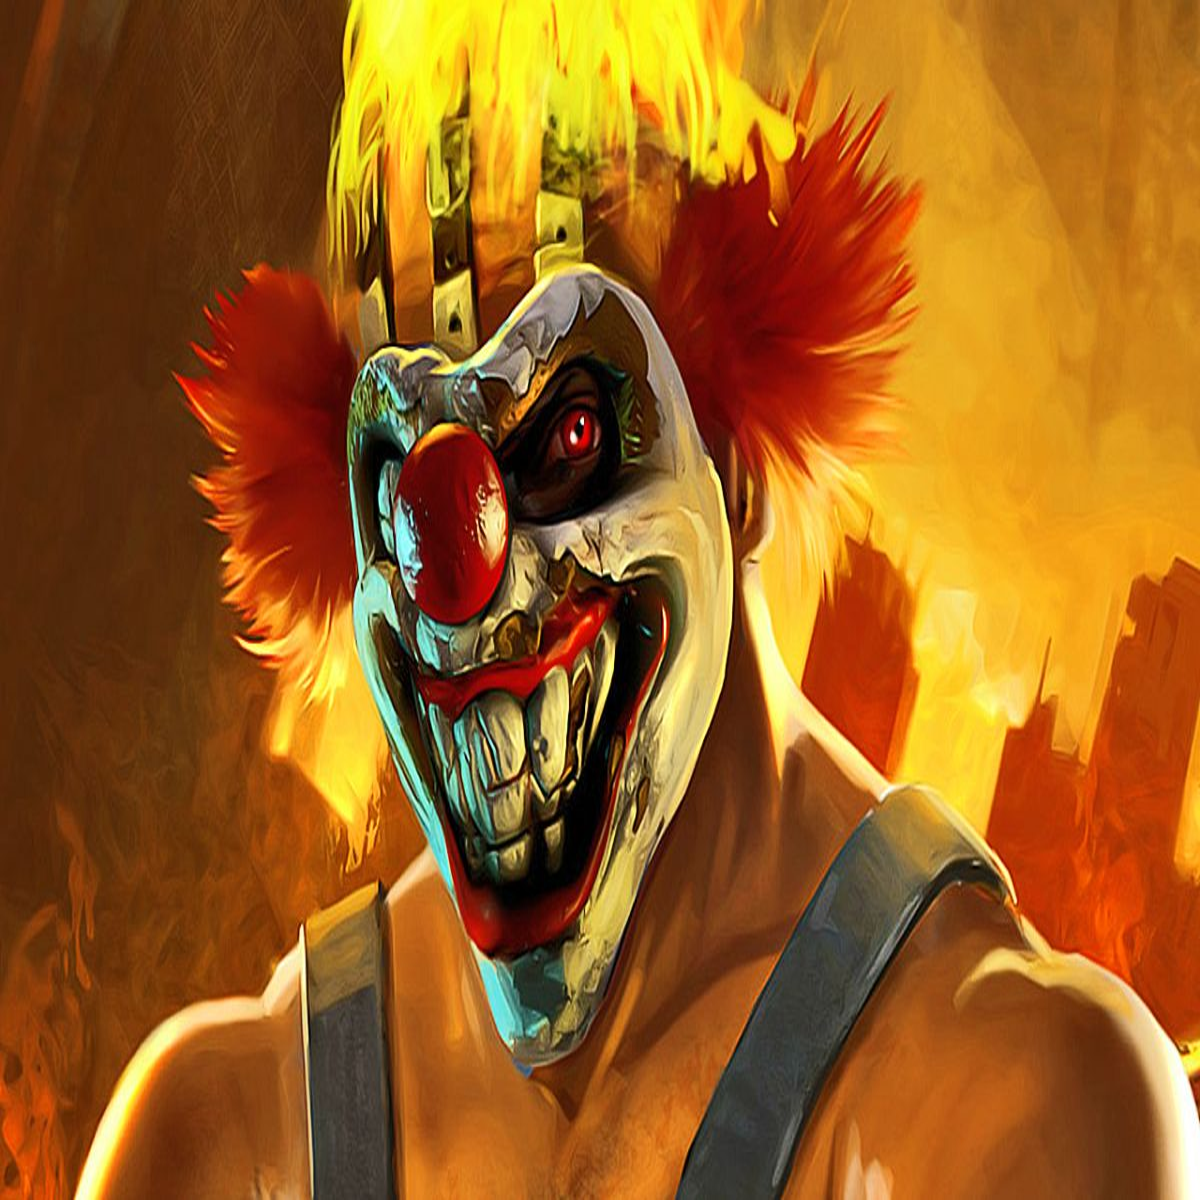 Slideshow: Twisted Metal: The Cast of the Live-Action Series